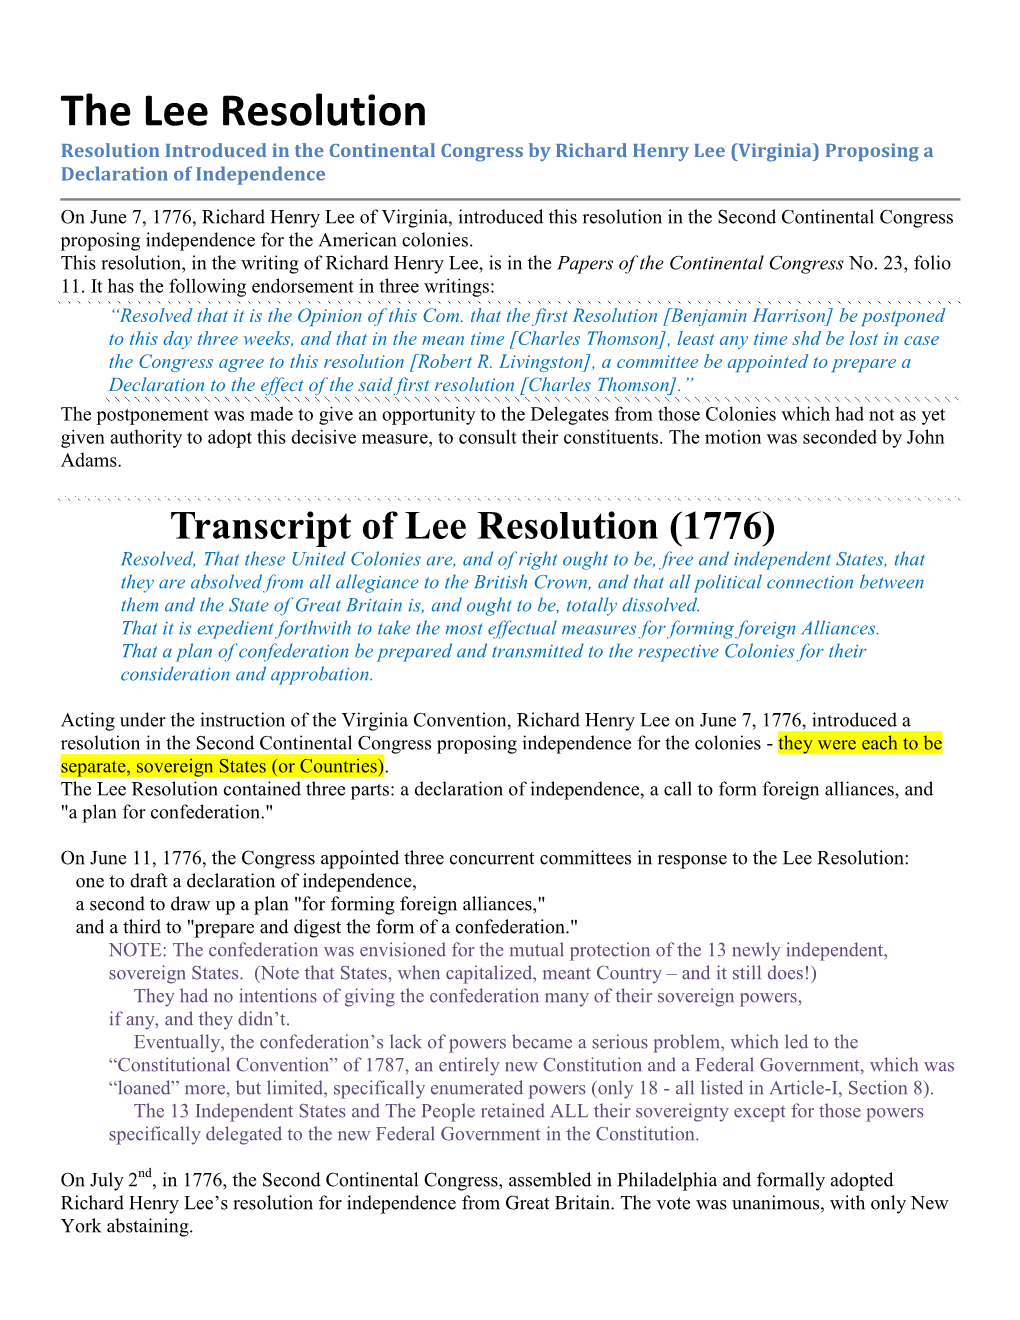 The Lee Resolution Resolution Introduced in the Continental Congress by Richard Henry Lee (Virginia) Proposing a Declaration of Independence